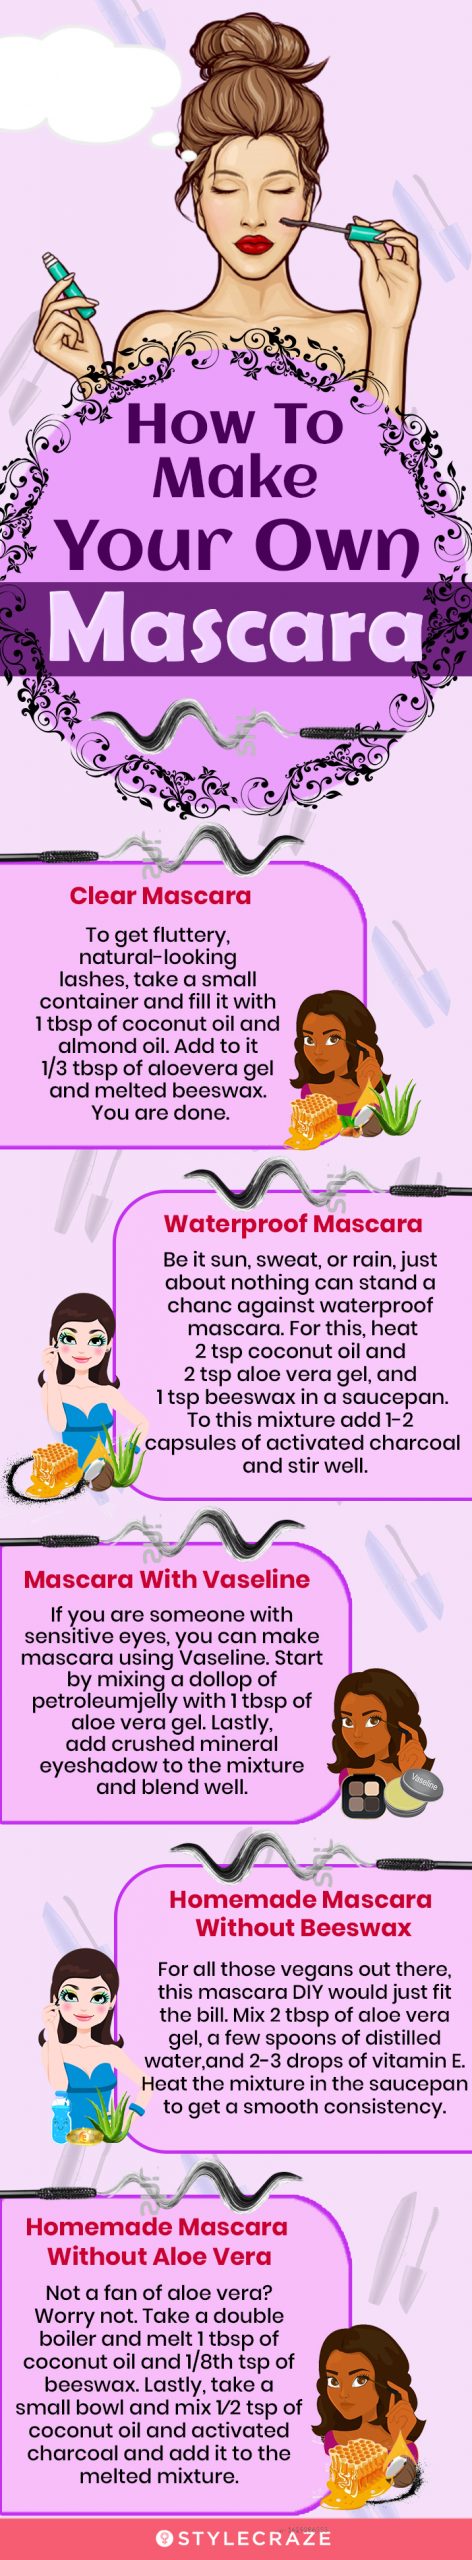 how to make your own mascara? [infographic]